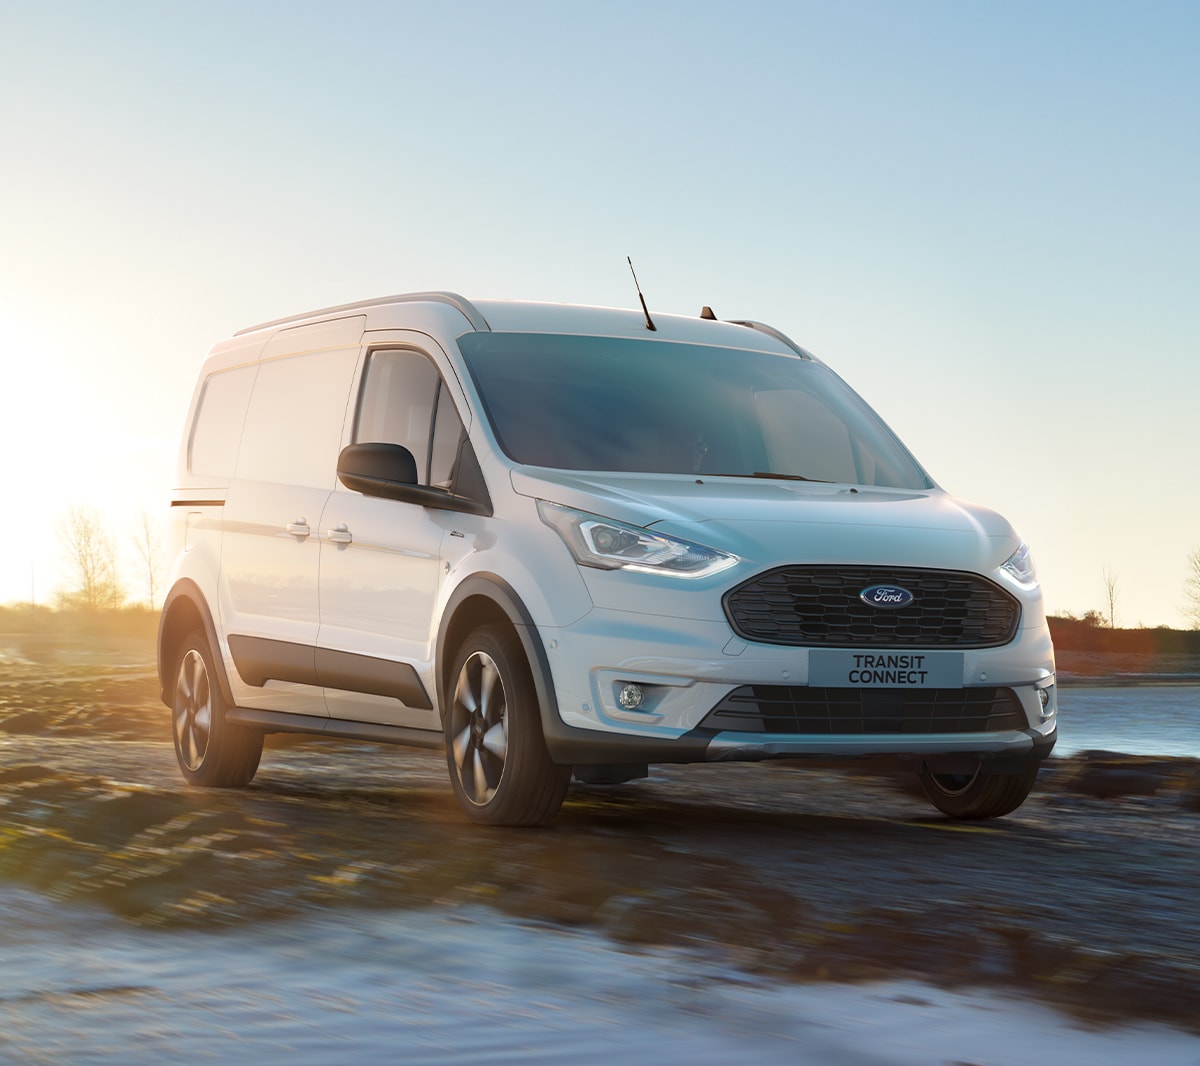 Vista semi frontal do Ford Transit Connect